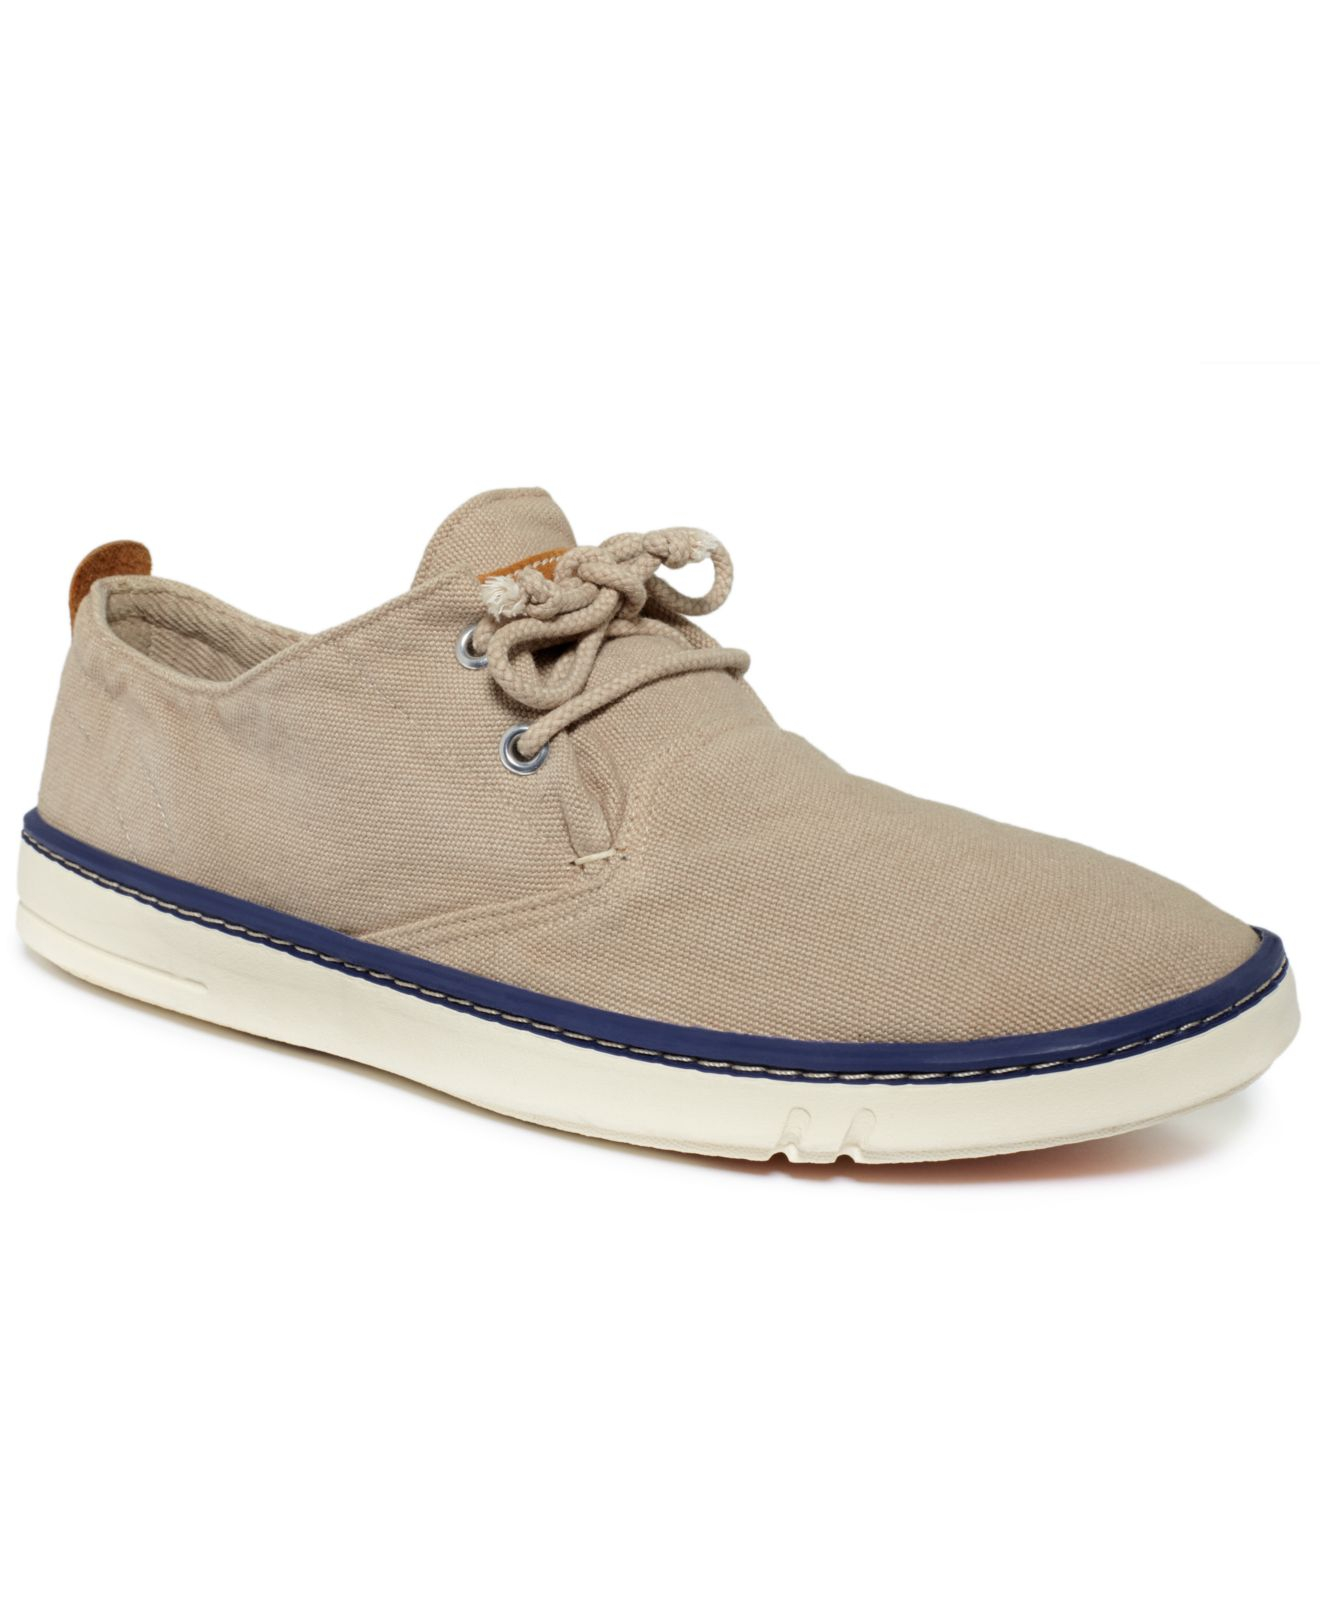 Lyst - Timberland Earthkeepers Hookset Handcrafted Canvas Oxfords in ...